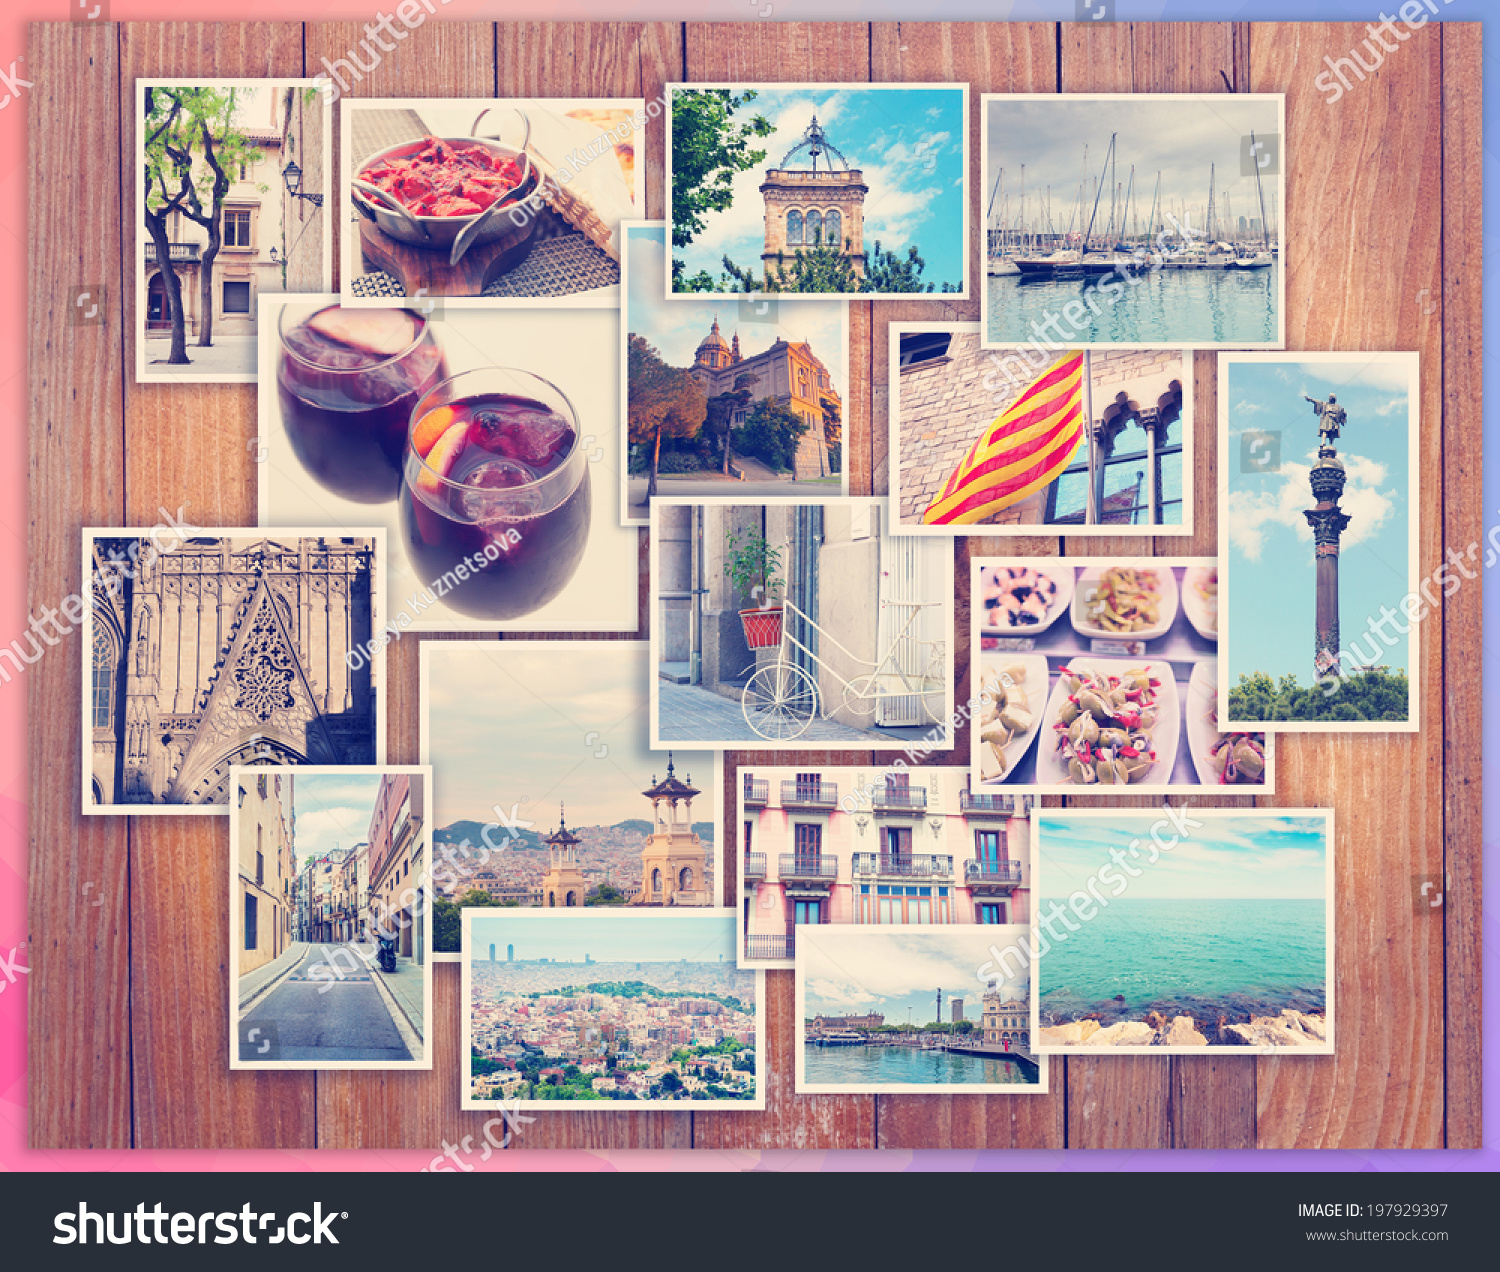 http://image.shutterstock.com/z/stock-photo-barcelona-collage-a-few-photos-on-a-wooden-background-postcard-197929397.jpg